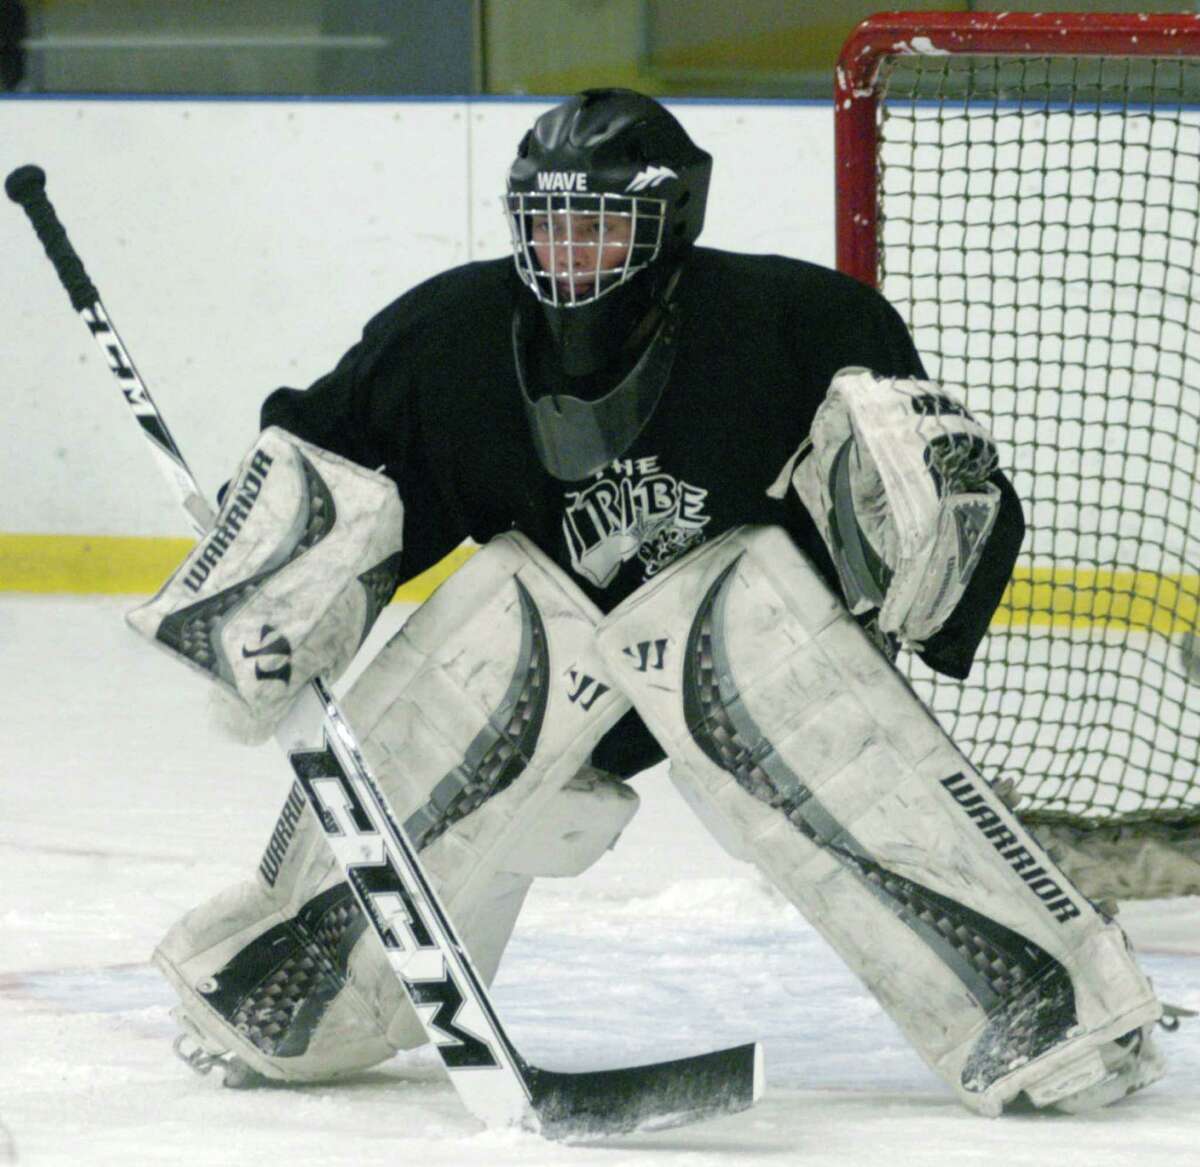 Green Wave goaltender Nick Capriglione is expected to anchor a strong defense this season for New Milford High School's ice hockey team. Dec. 8, 2013